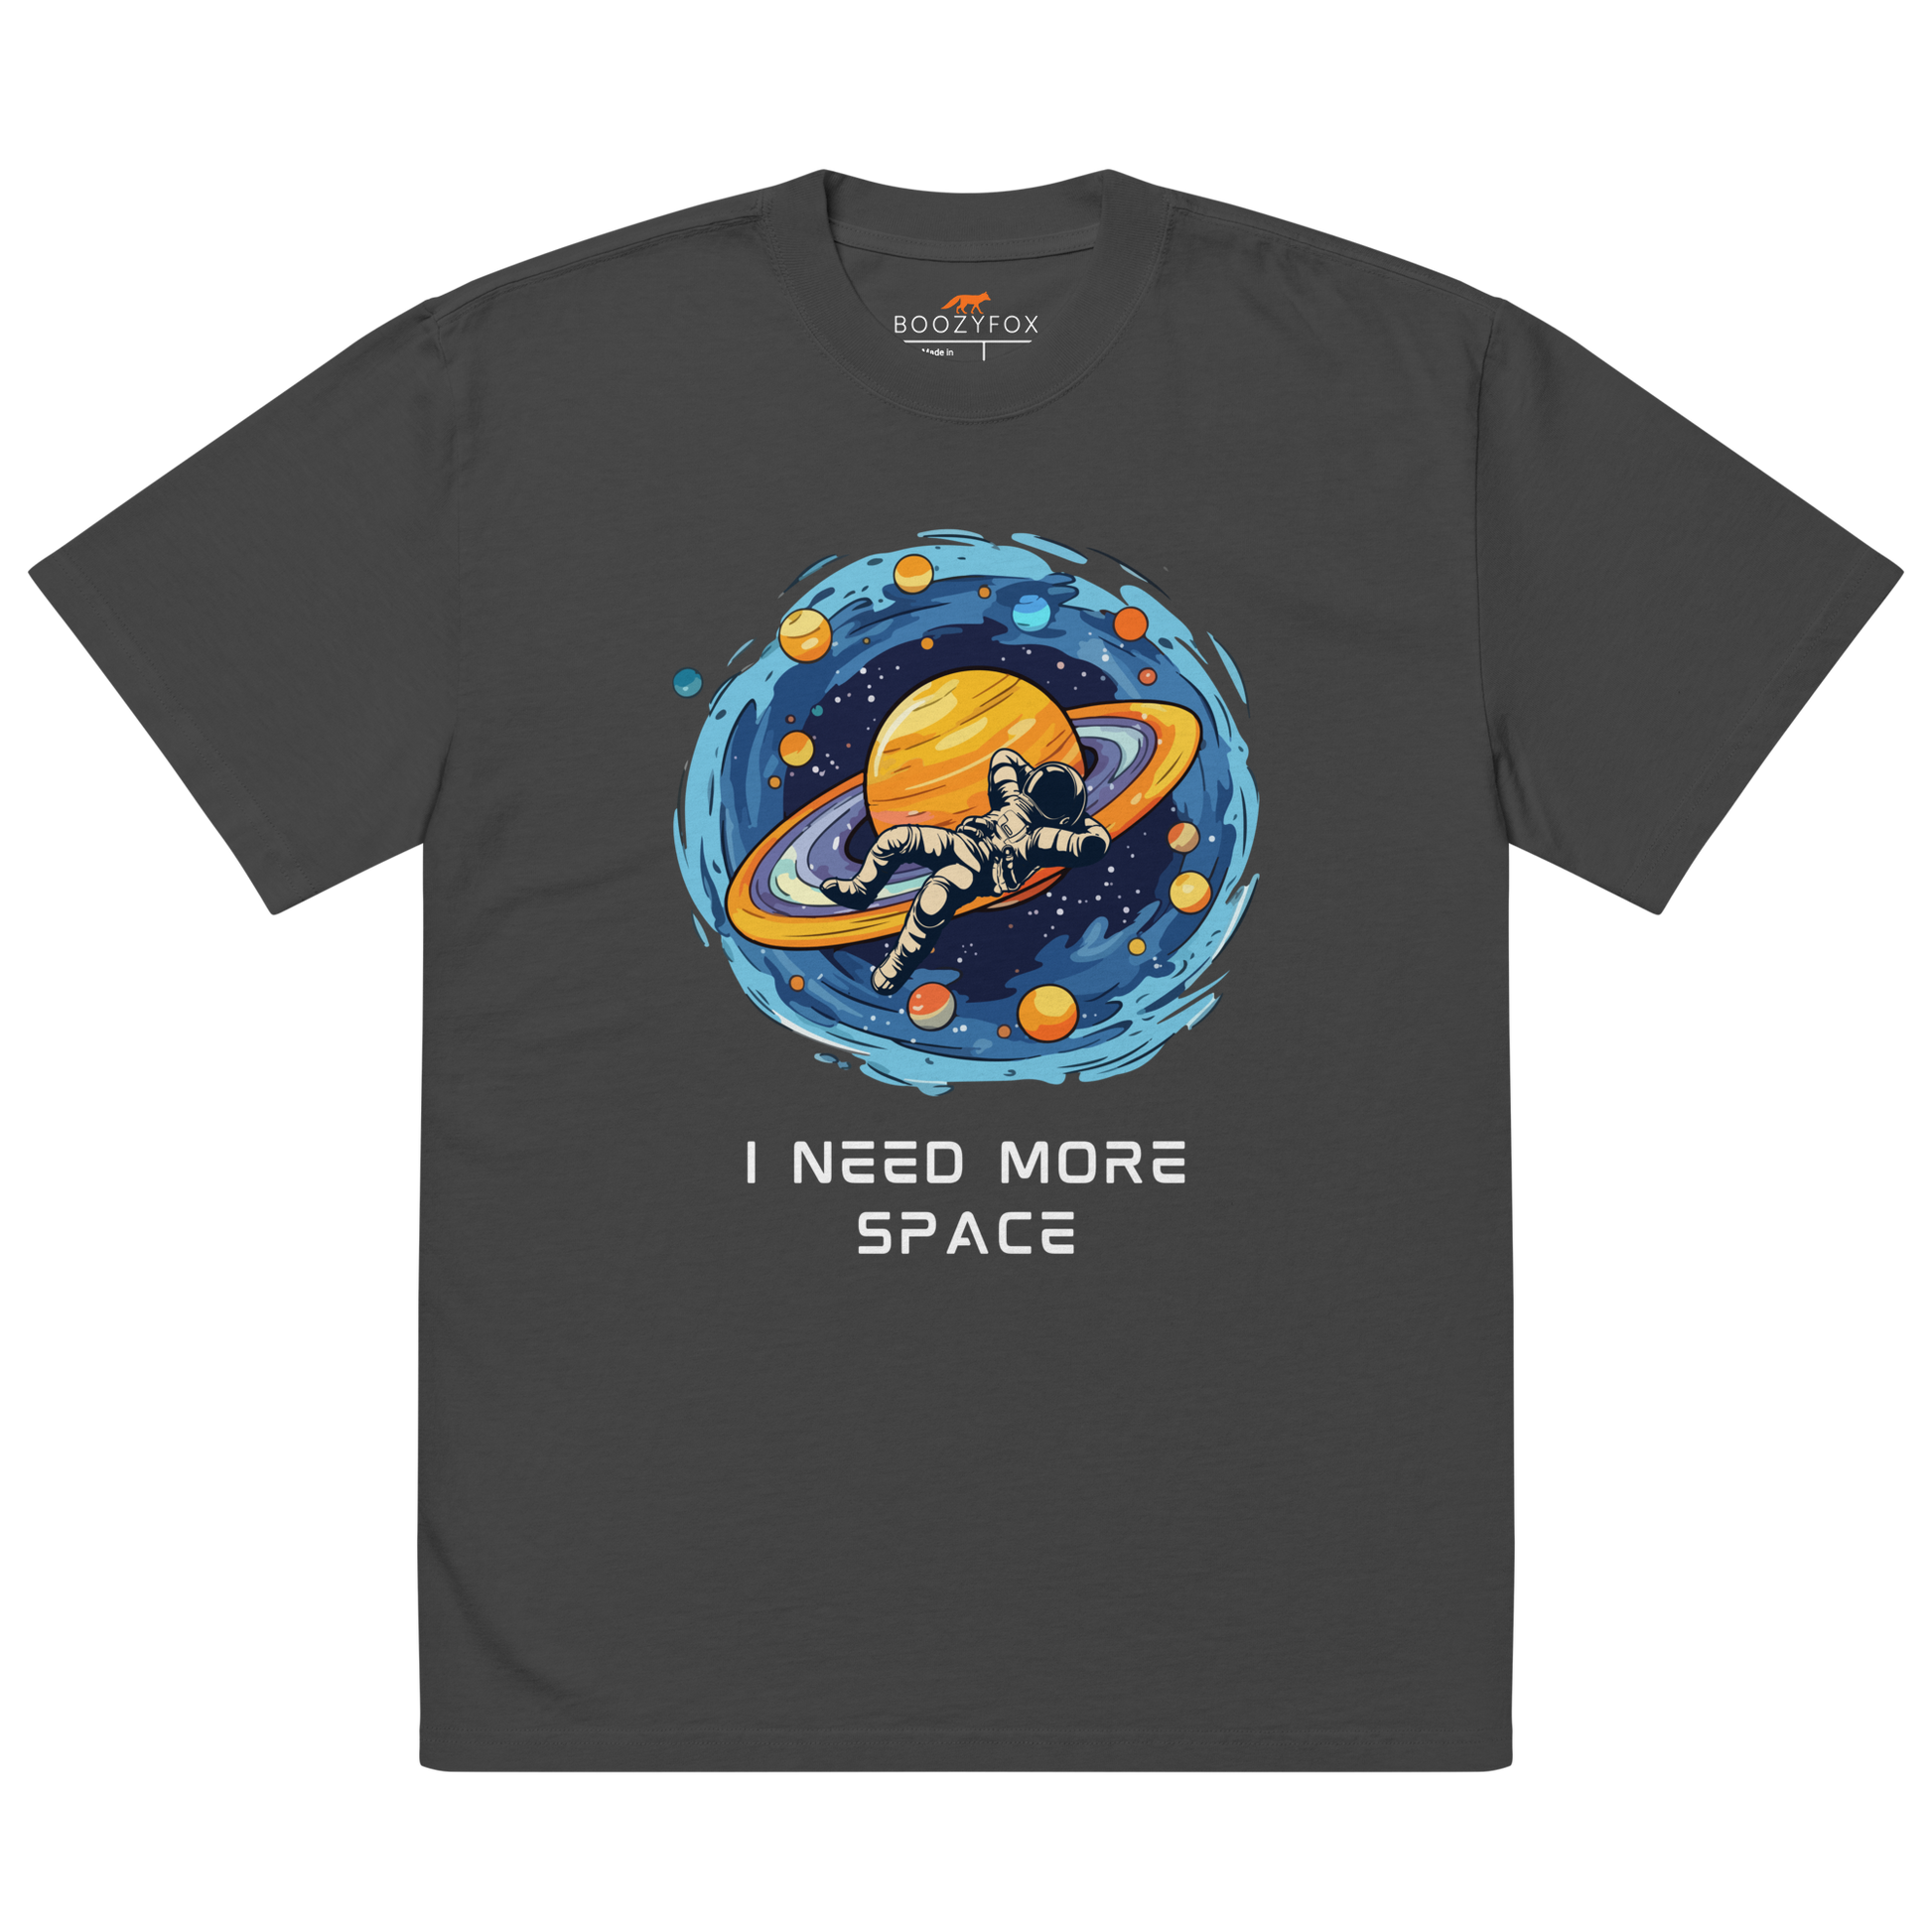 Faded Black Space Oversized T-Shirt featuring a captivating I Need More Space graphic on the chest - Funny Graphic Space Oversized Tees - Boozy Fox